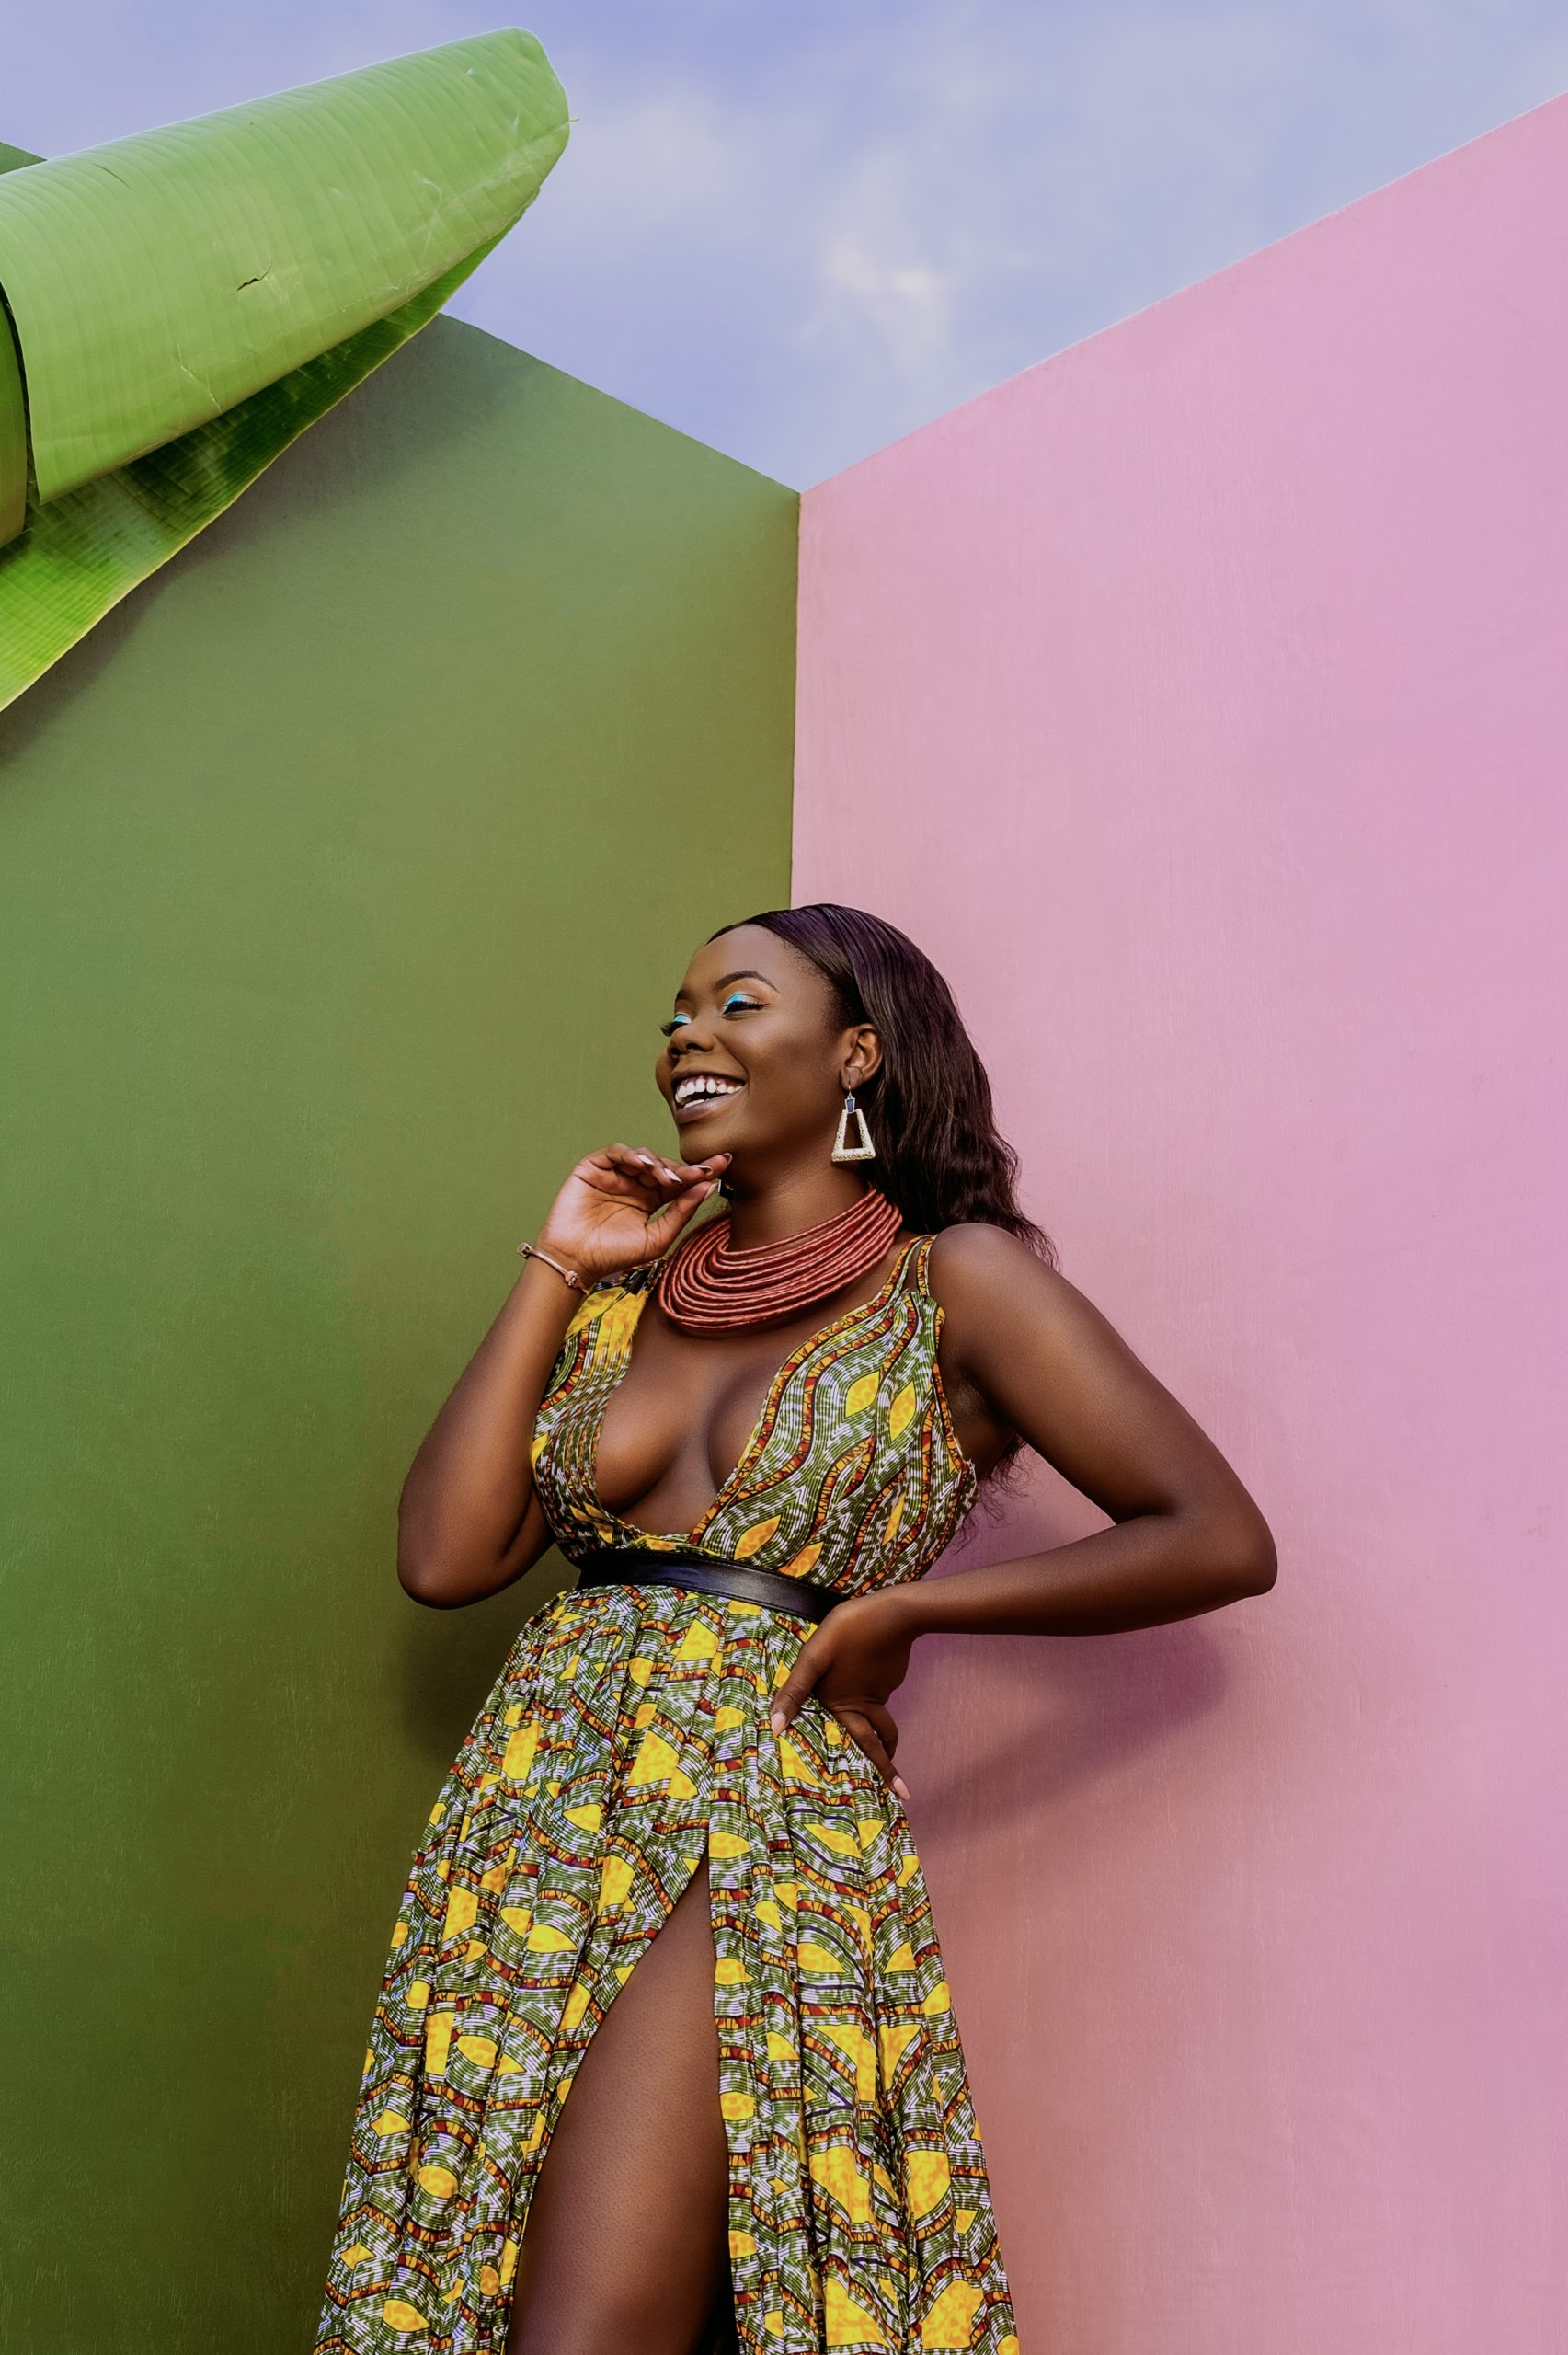 Supporting women in the industry: Meet Adele, Model and body-positive activist [@Adele_Makayi ]